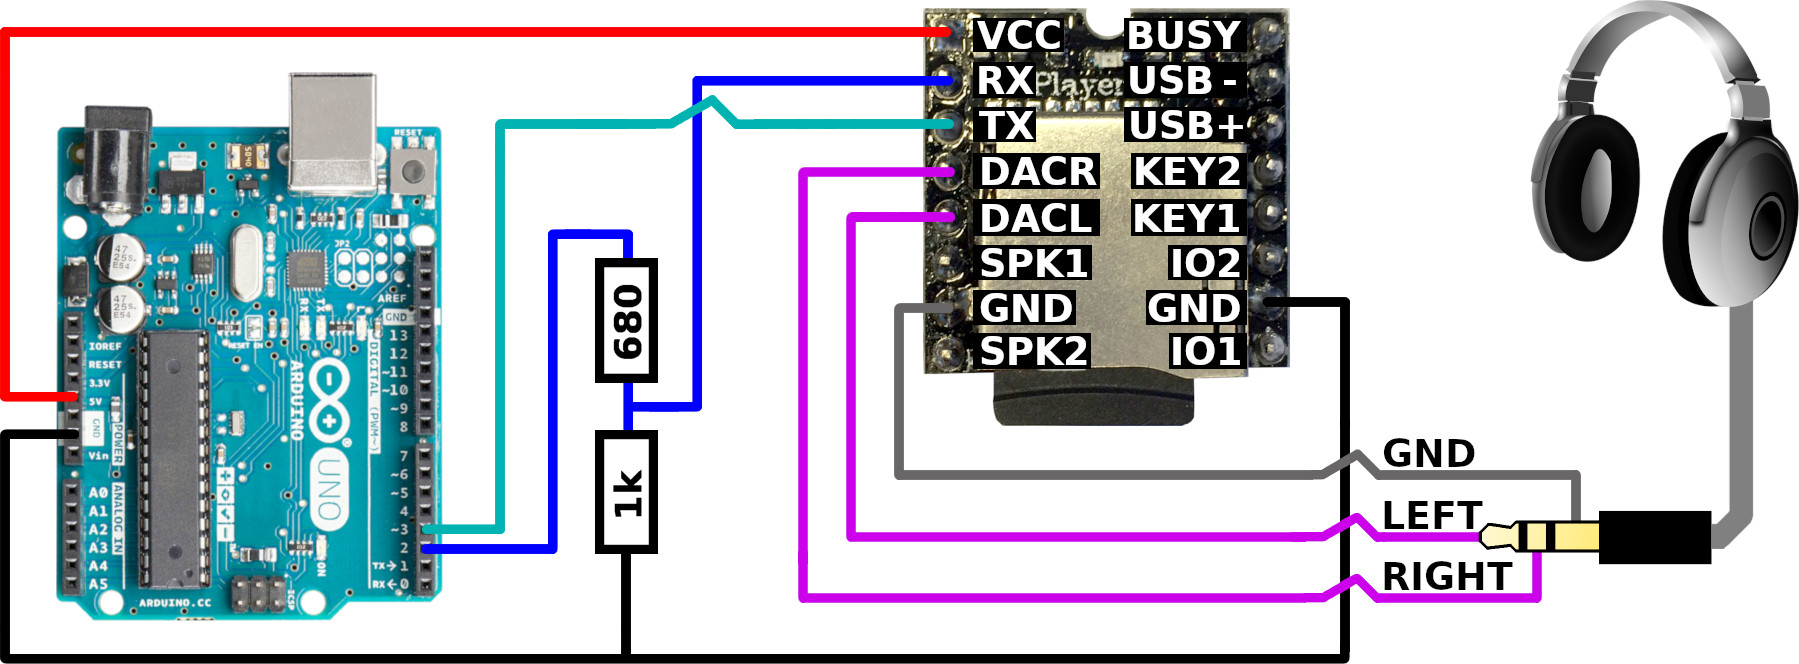 P-Channel MOSFET connection diagram. Connected on the VCC side.